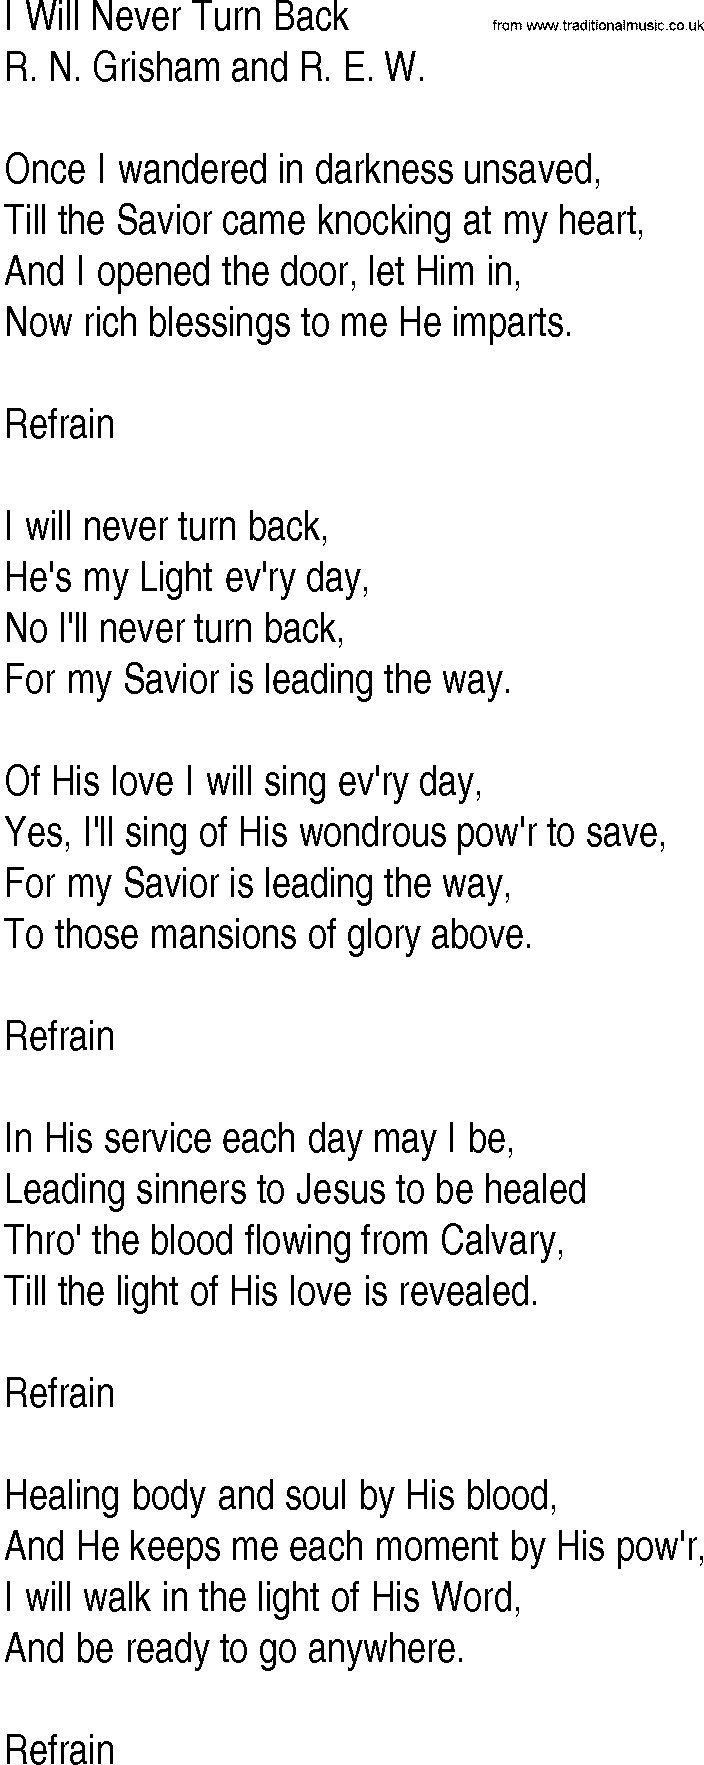 Hymn and Gospel Song: I Will Never Turn Back by R N Grisham and R E W lyrics